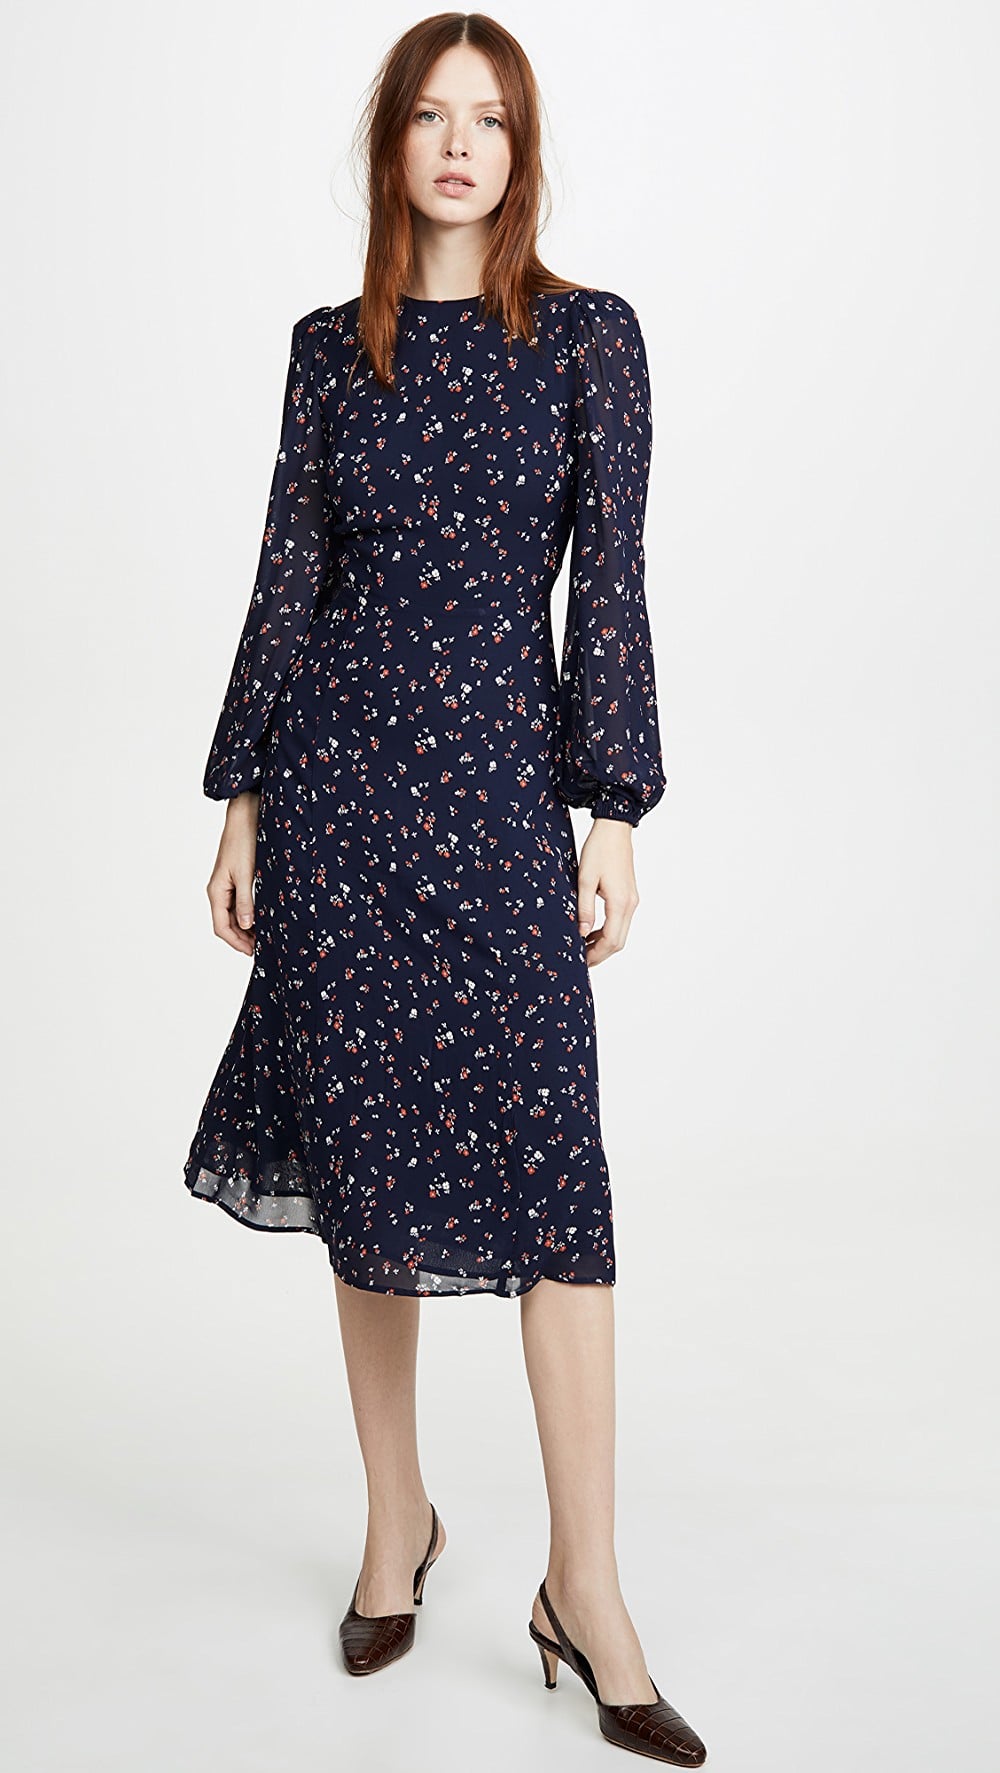 33 Stylish Winter Dresses From the Coolest Brands